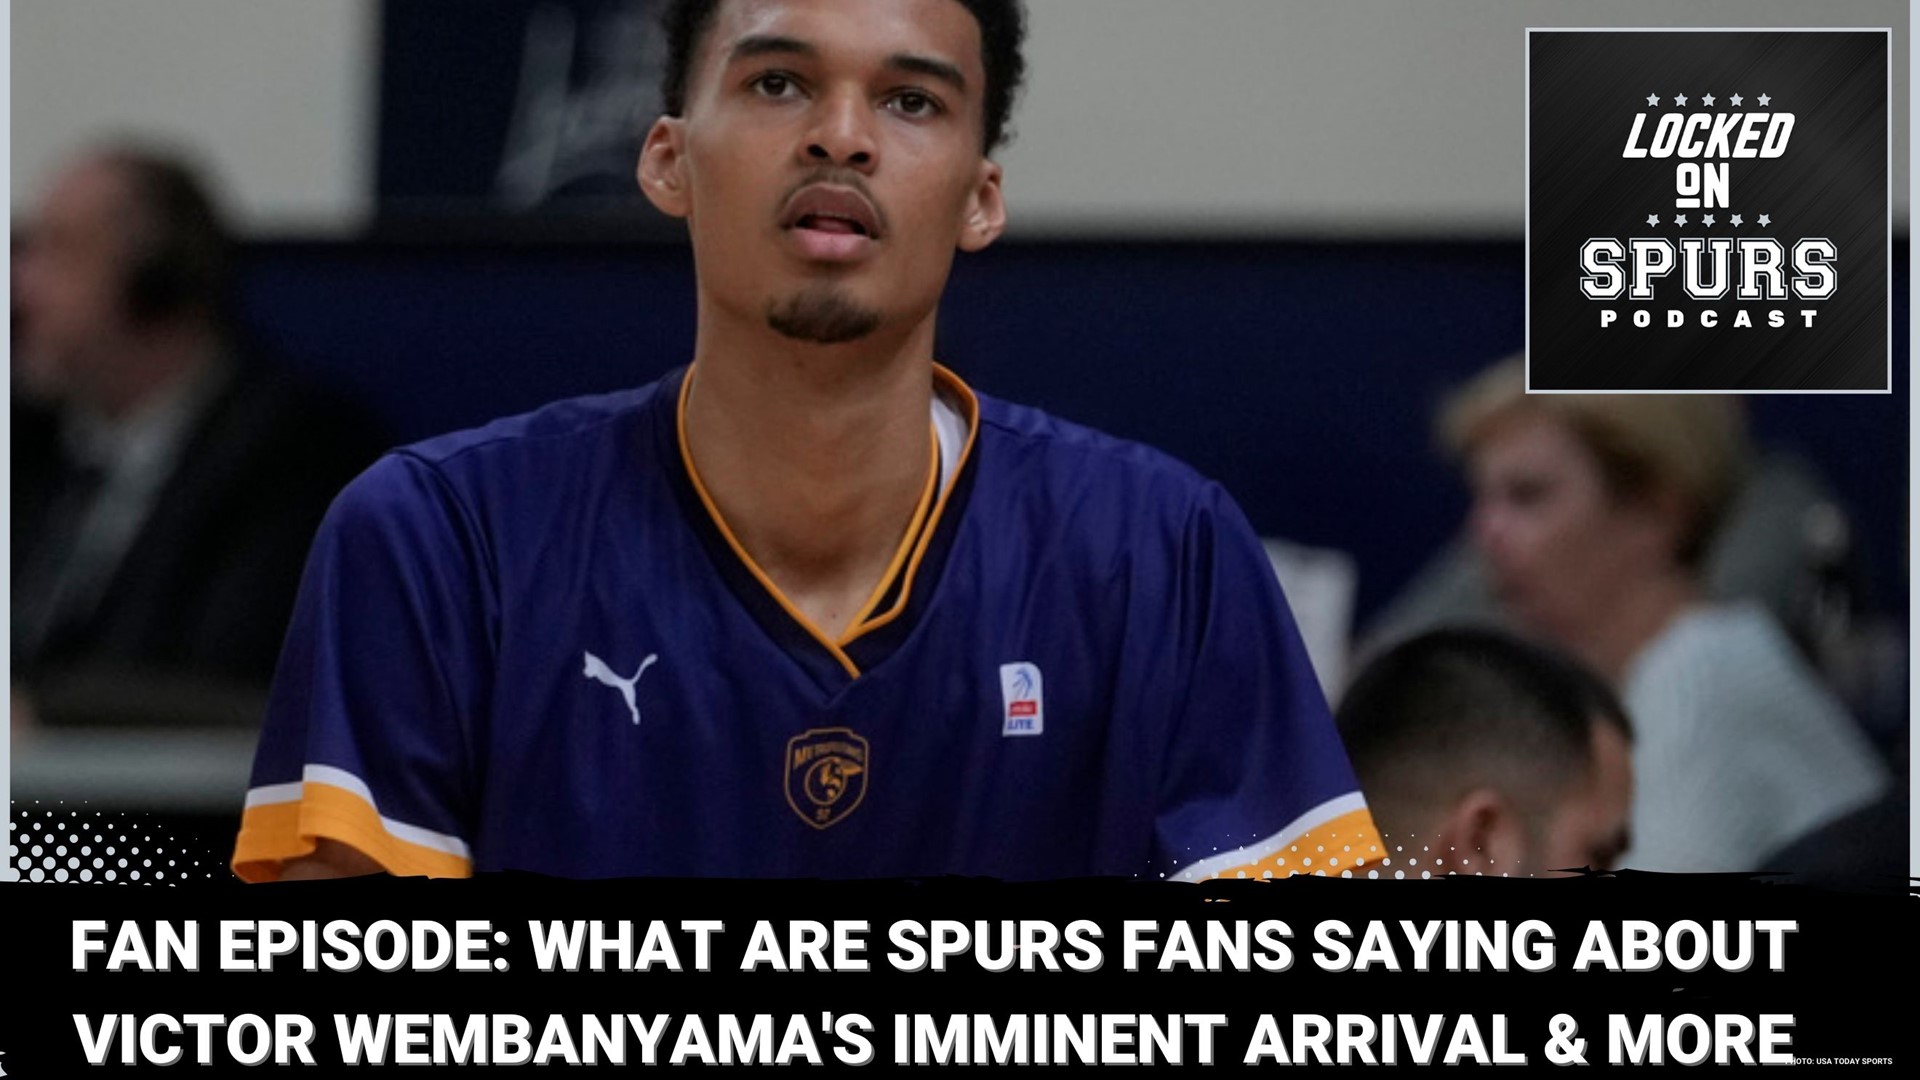 Spurs fans are thrilled about Wembanyama's immense potential on the court.